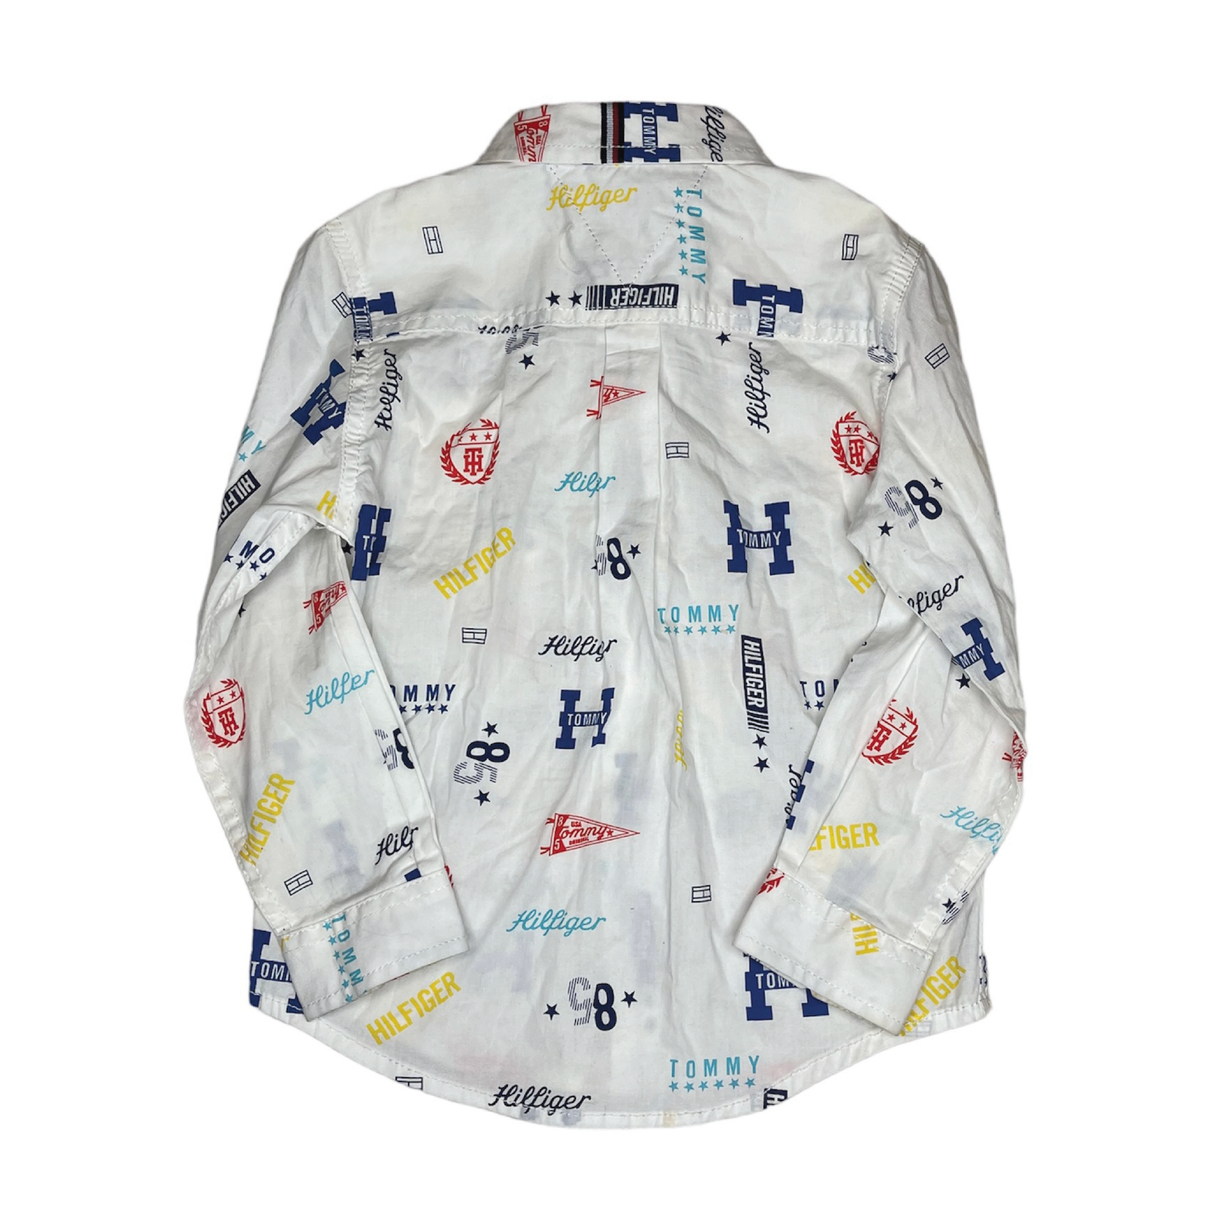 A Second Chance - Tommy Hilfiger 3Y Shirt kids - Delivery All Over Lebanon